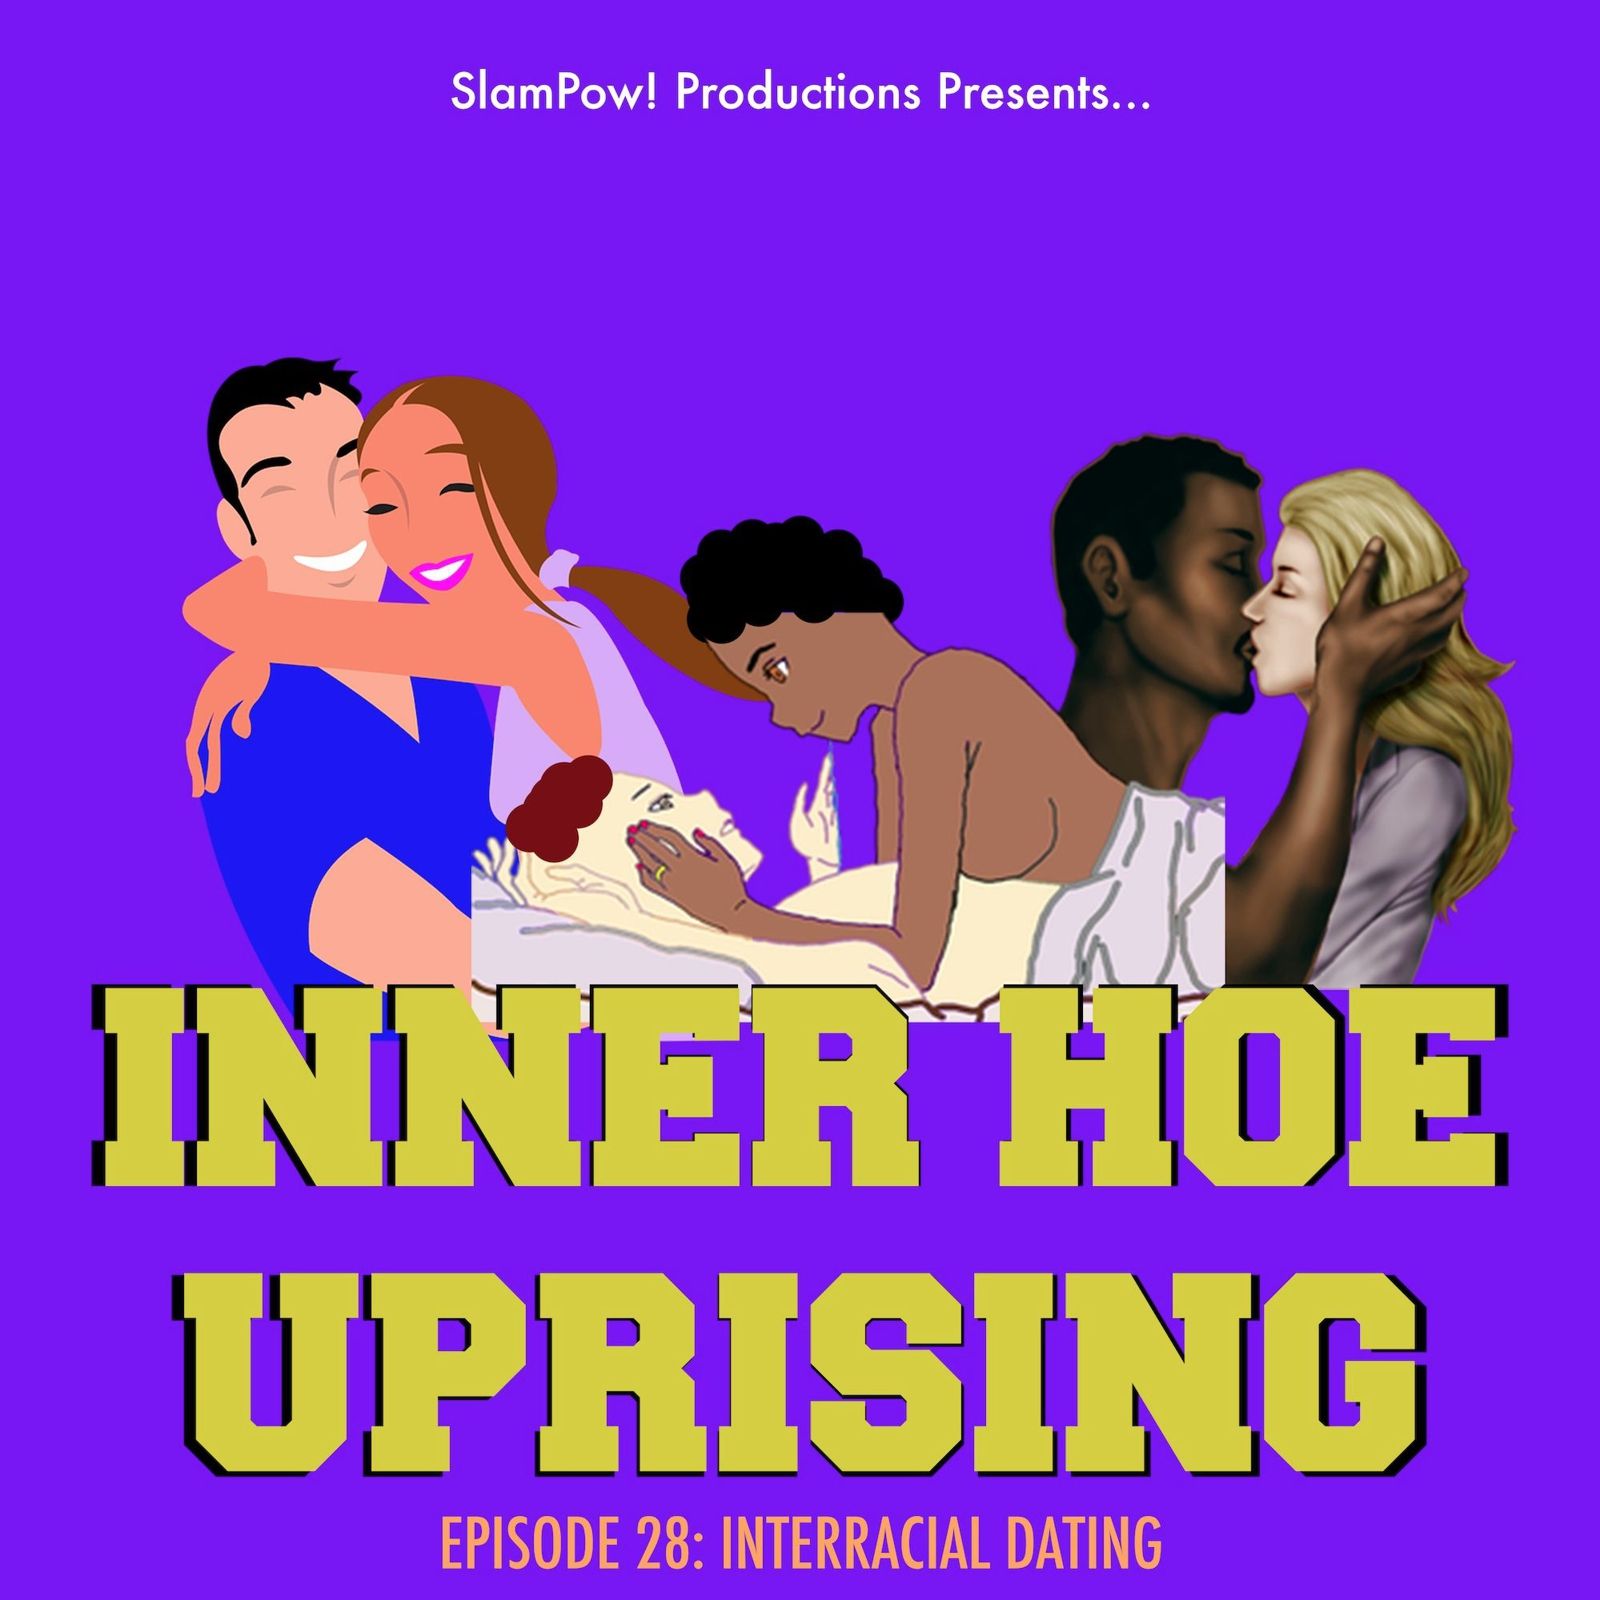 Thumbnail for "S1 Ep28: Interracial Dating".